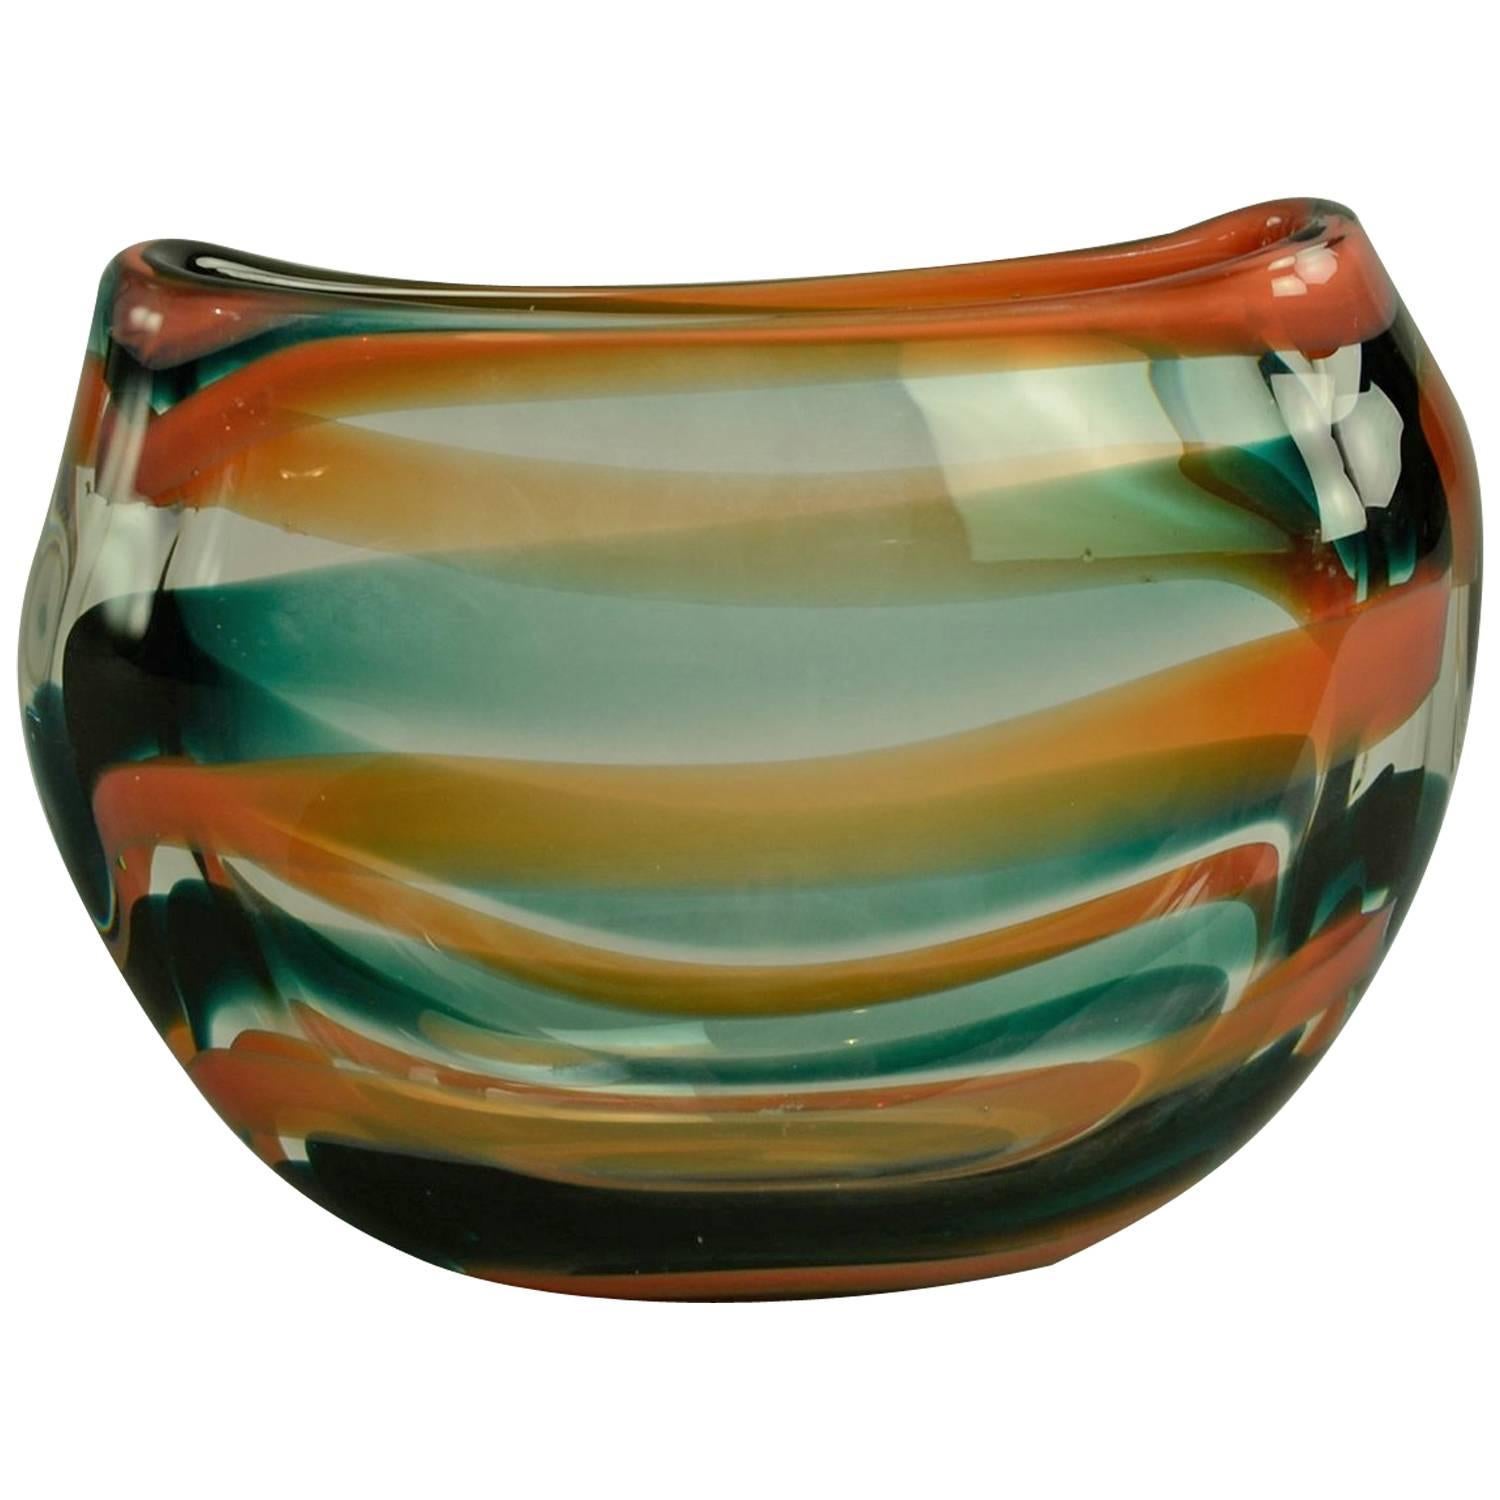 Glass Vase in Green, Orange and Clear Glass by Floris Meydam for Leerdam For Sale